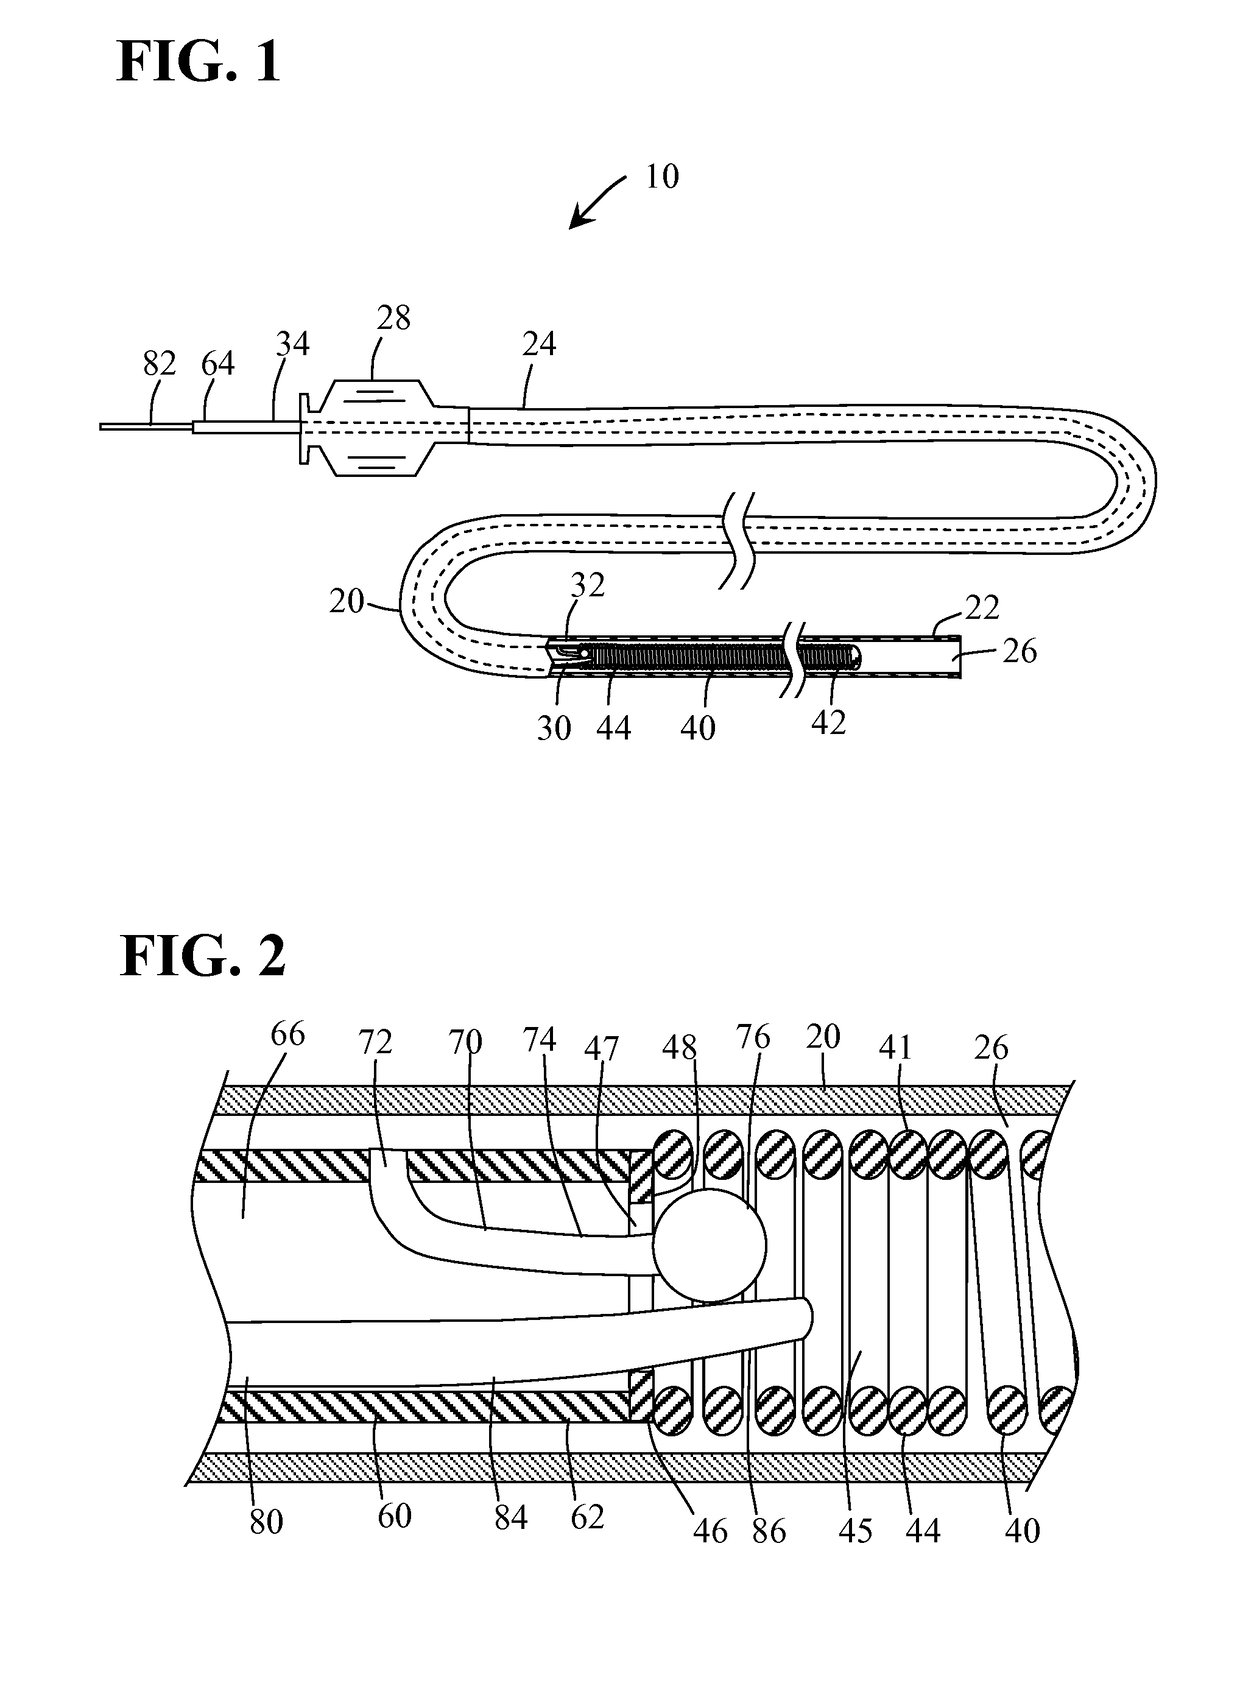 Detachable coil release system and handle assembly